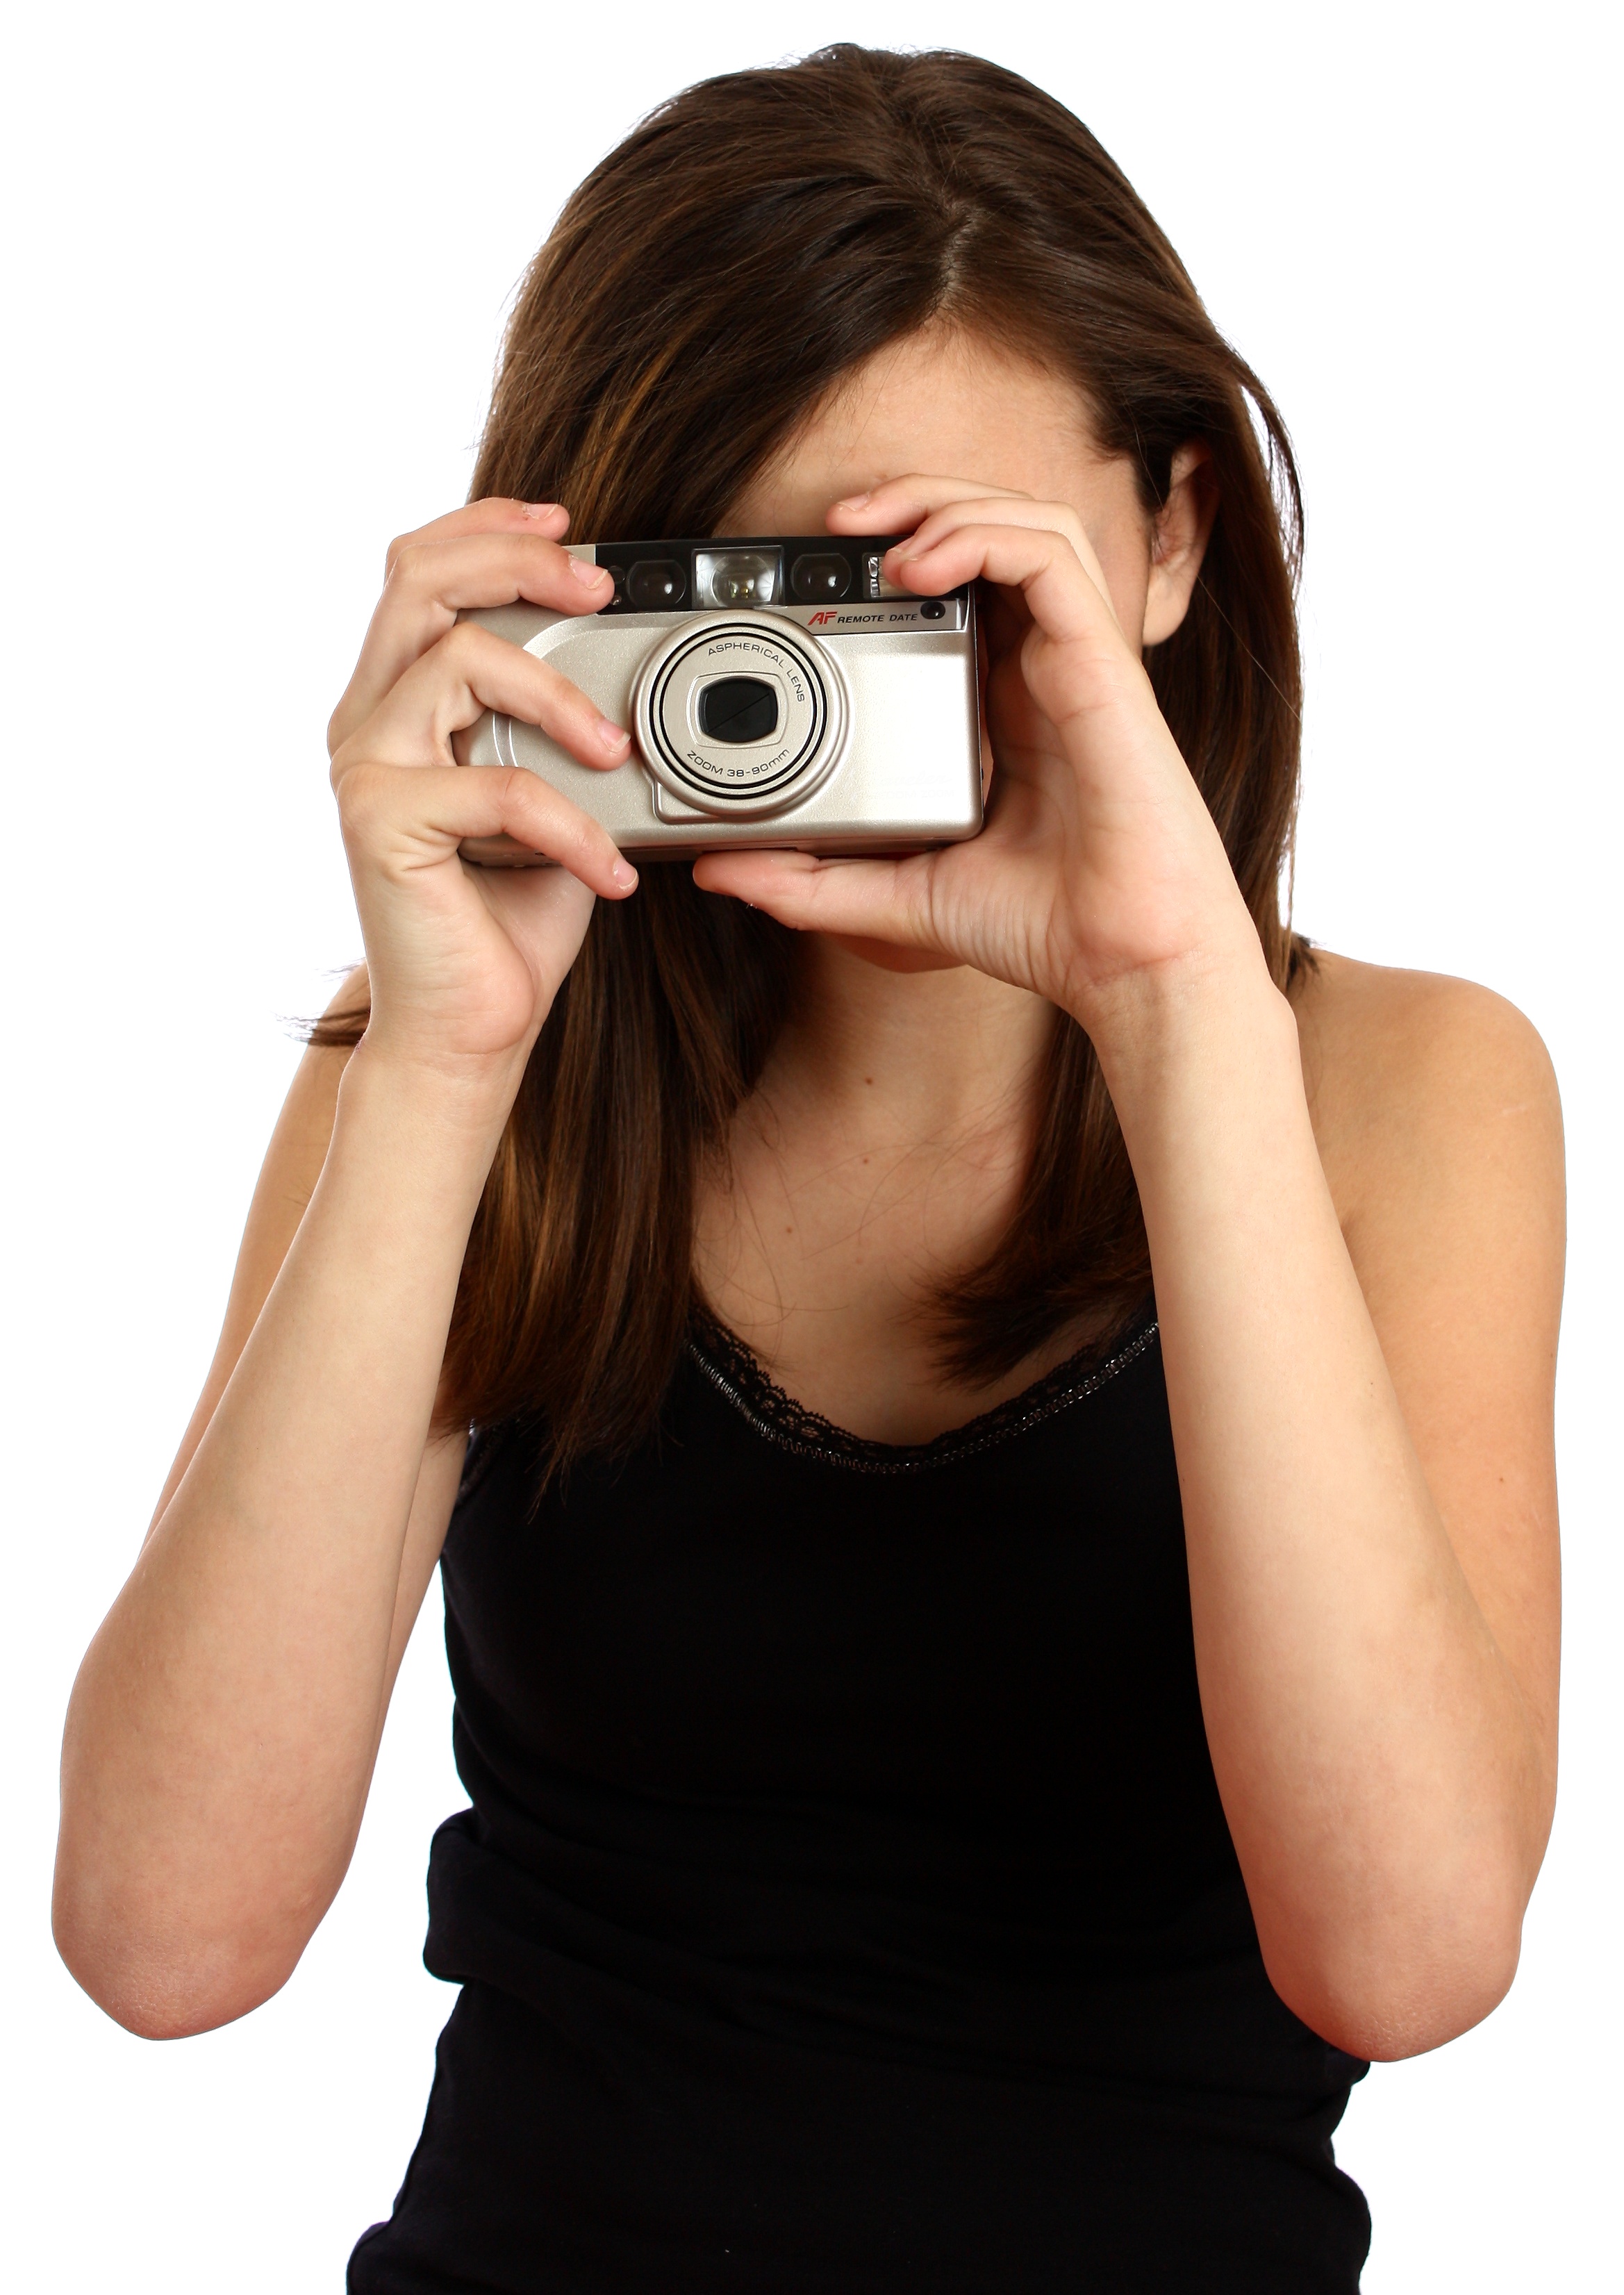 A cute young girl taking a picture, People, Tweens, Teens, Technologyobject, HQ Photo